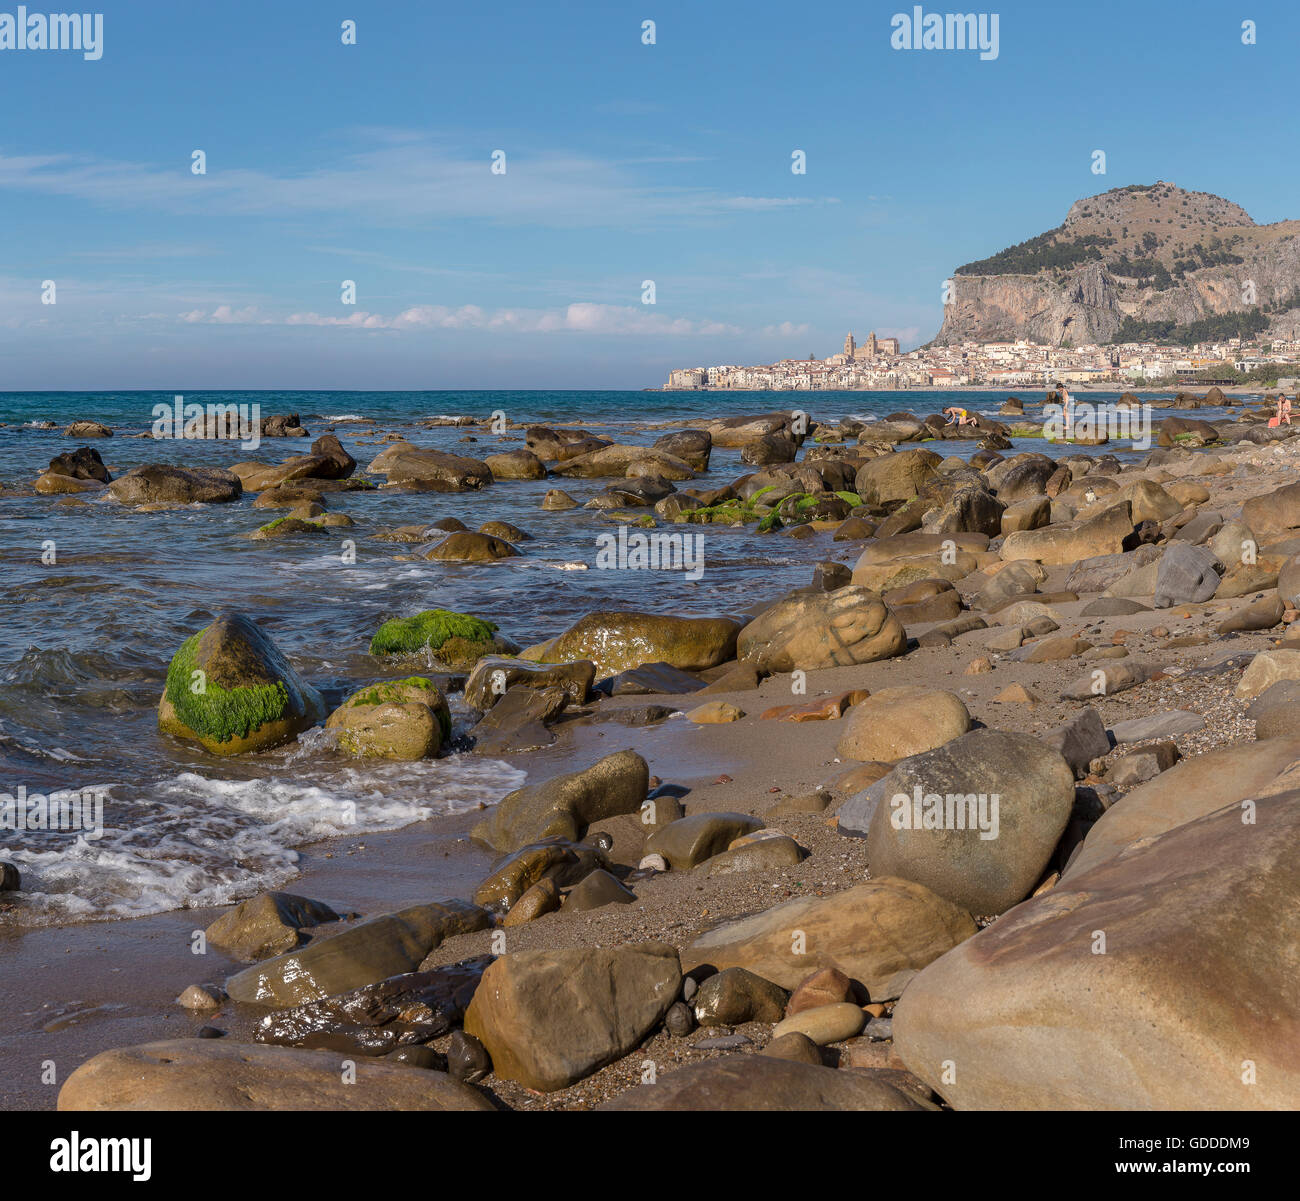 The city and the Rocca di Cefalu seen from the beach Stock Photo